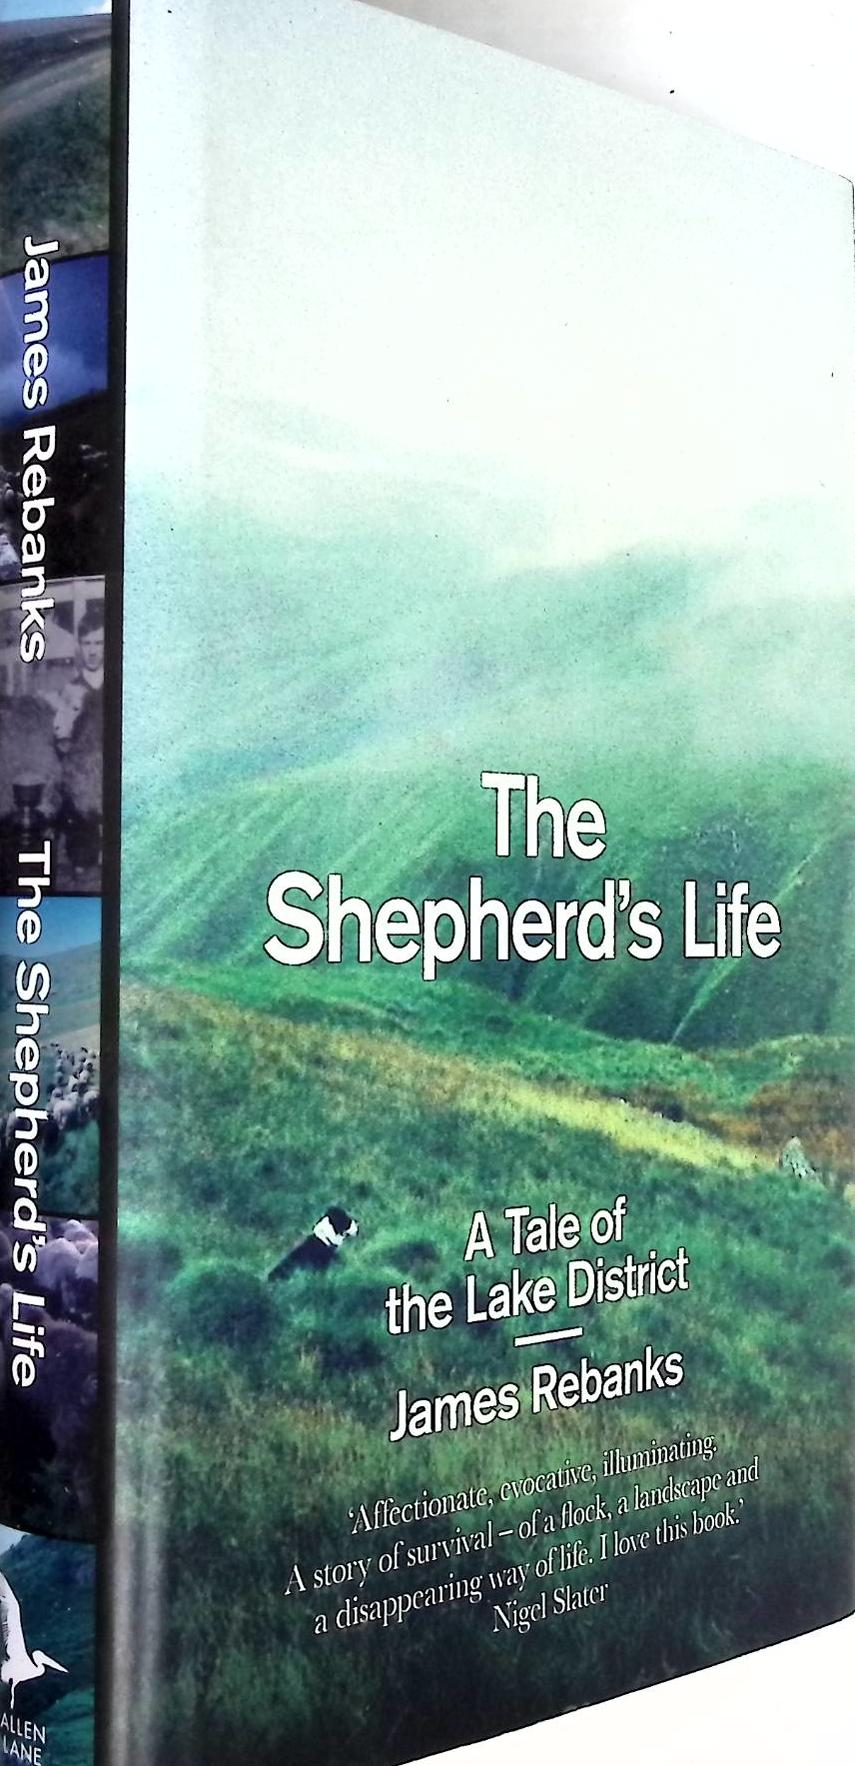 The Shepherd's Life. A Tale of the Lake District. Signed copy.